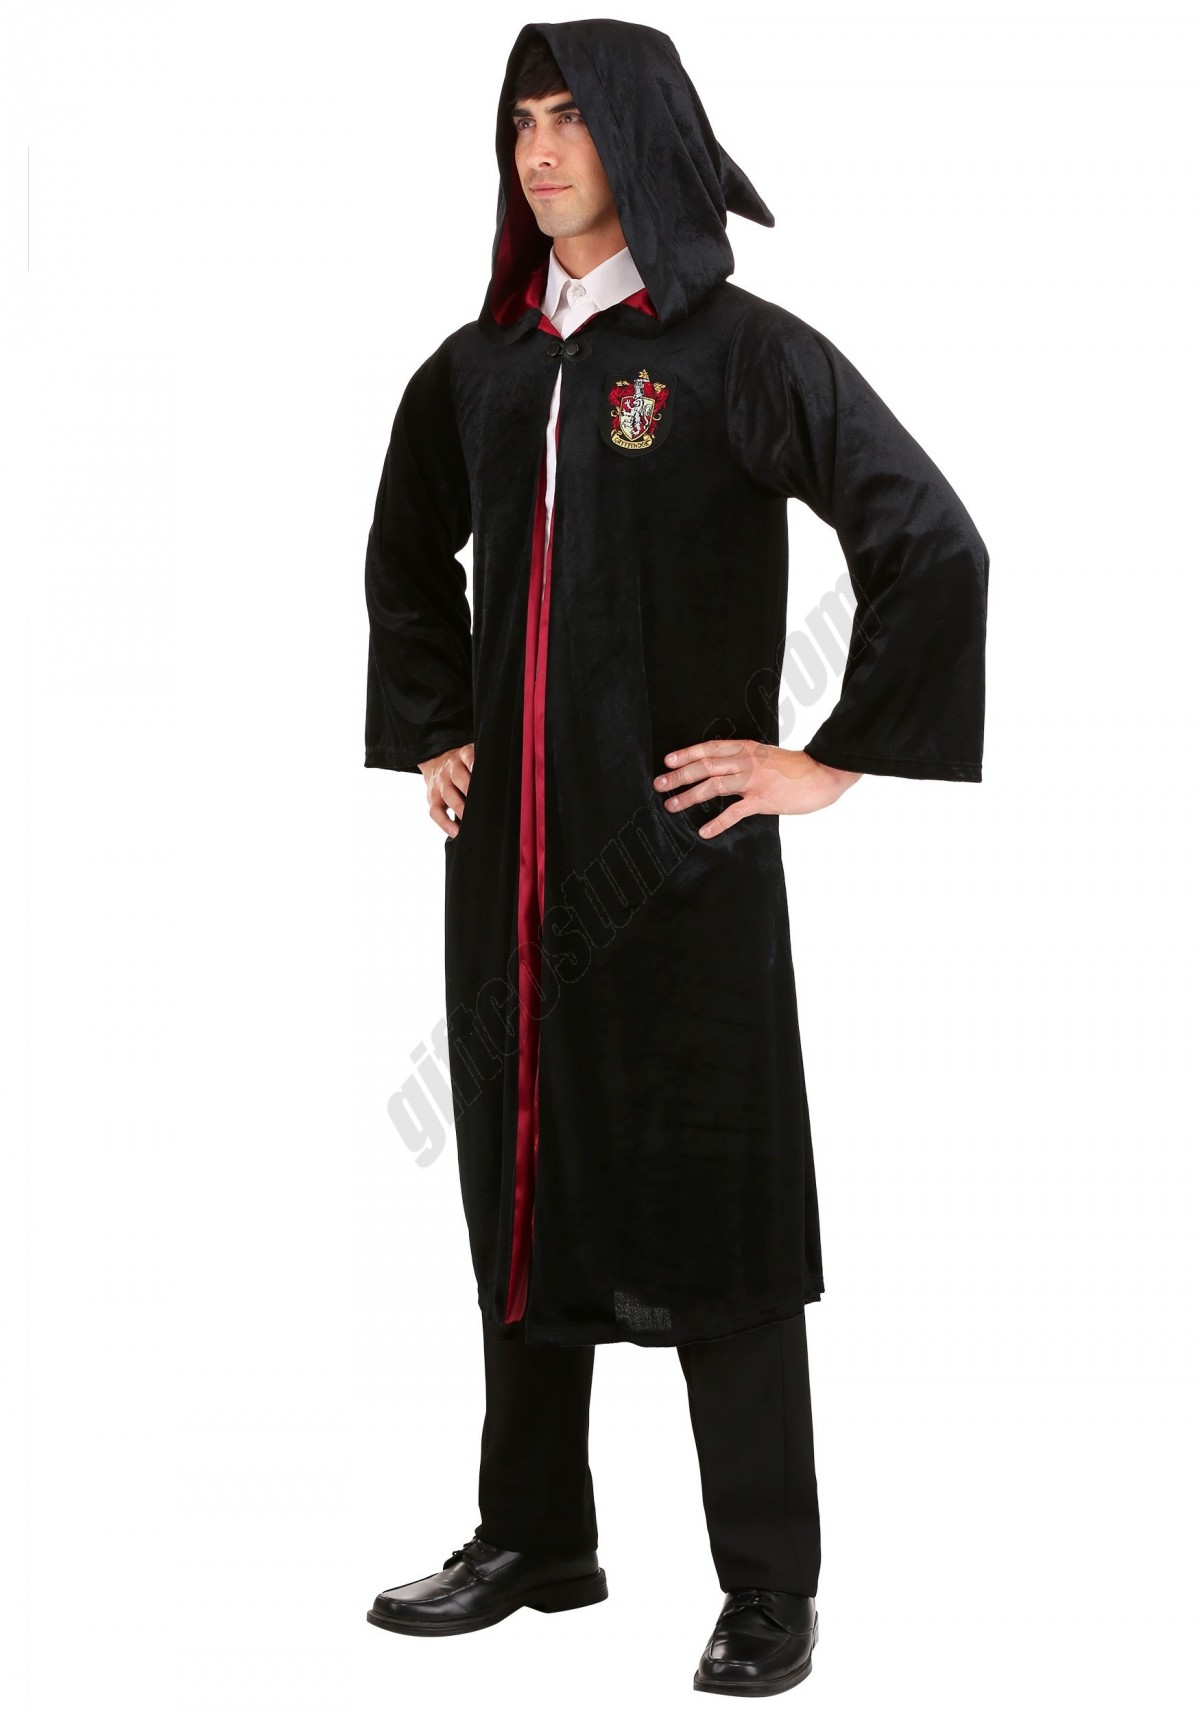 Harry Potter Adult Deluxe Gryffindor Robe Costume Promotions - -4